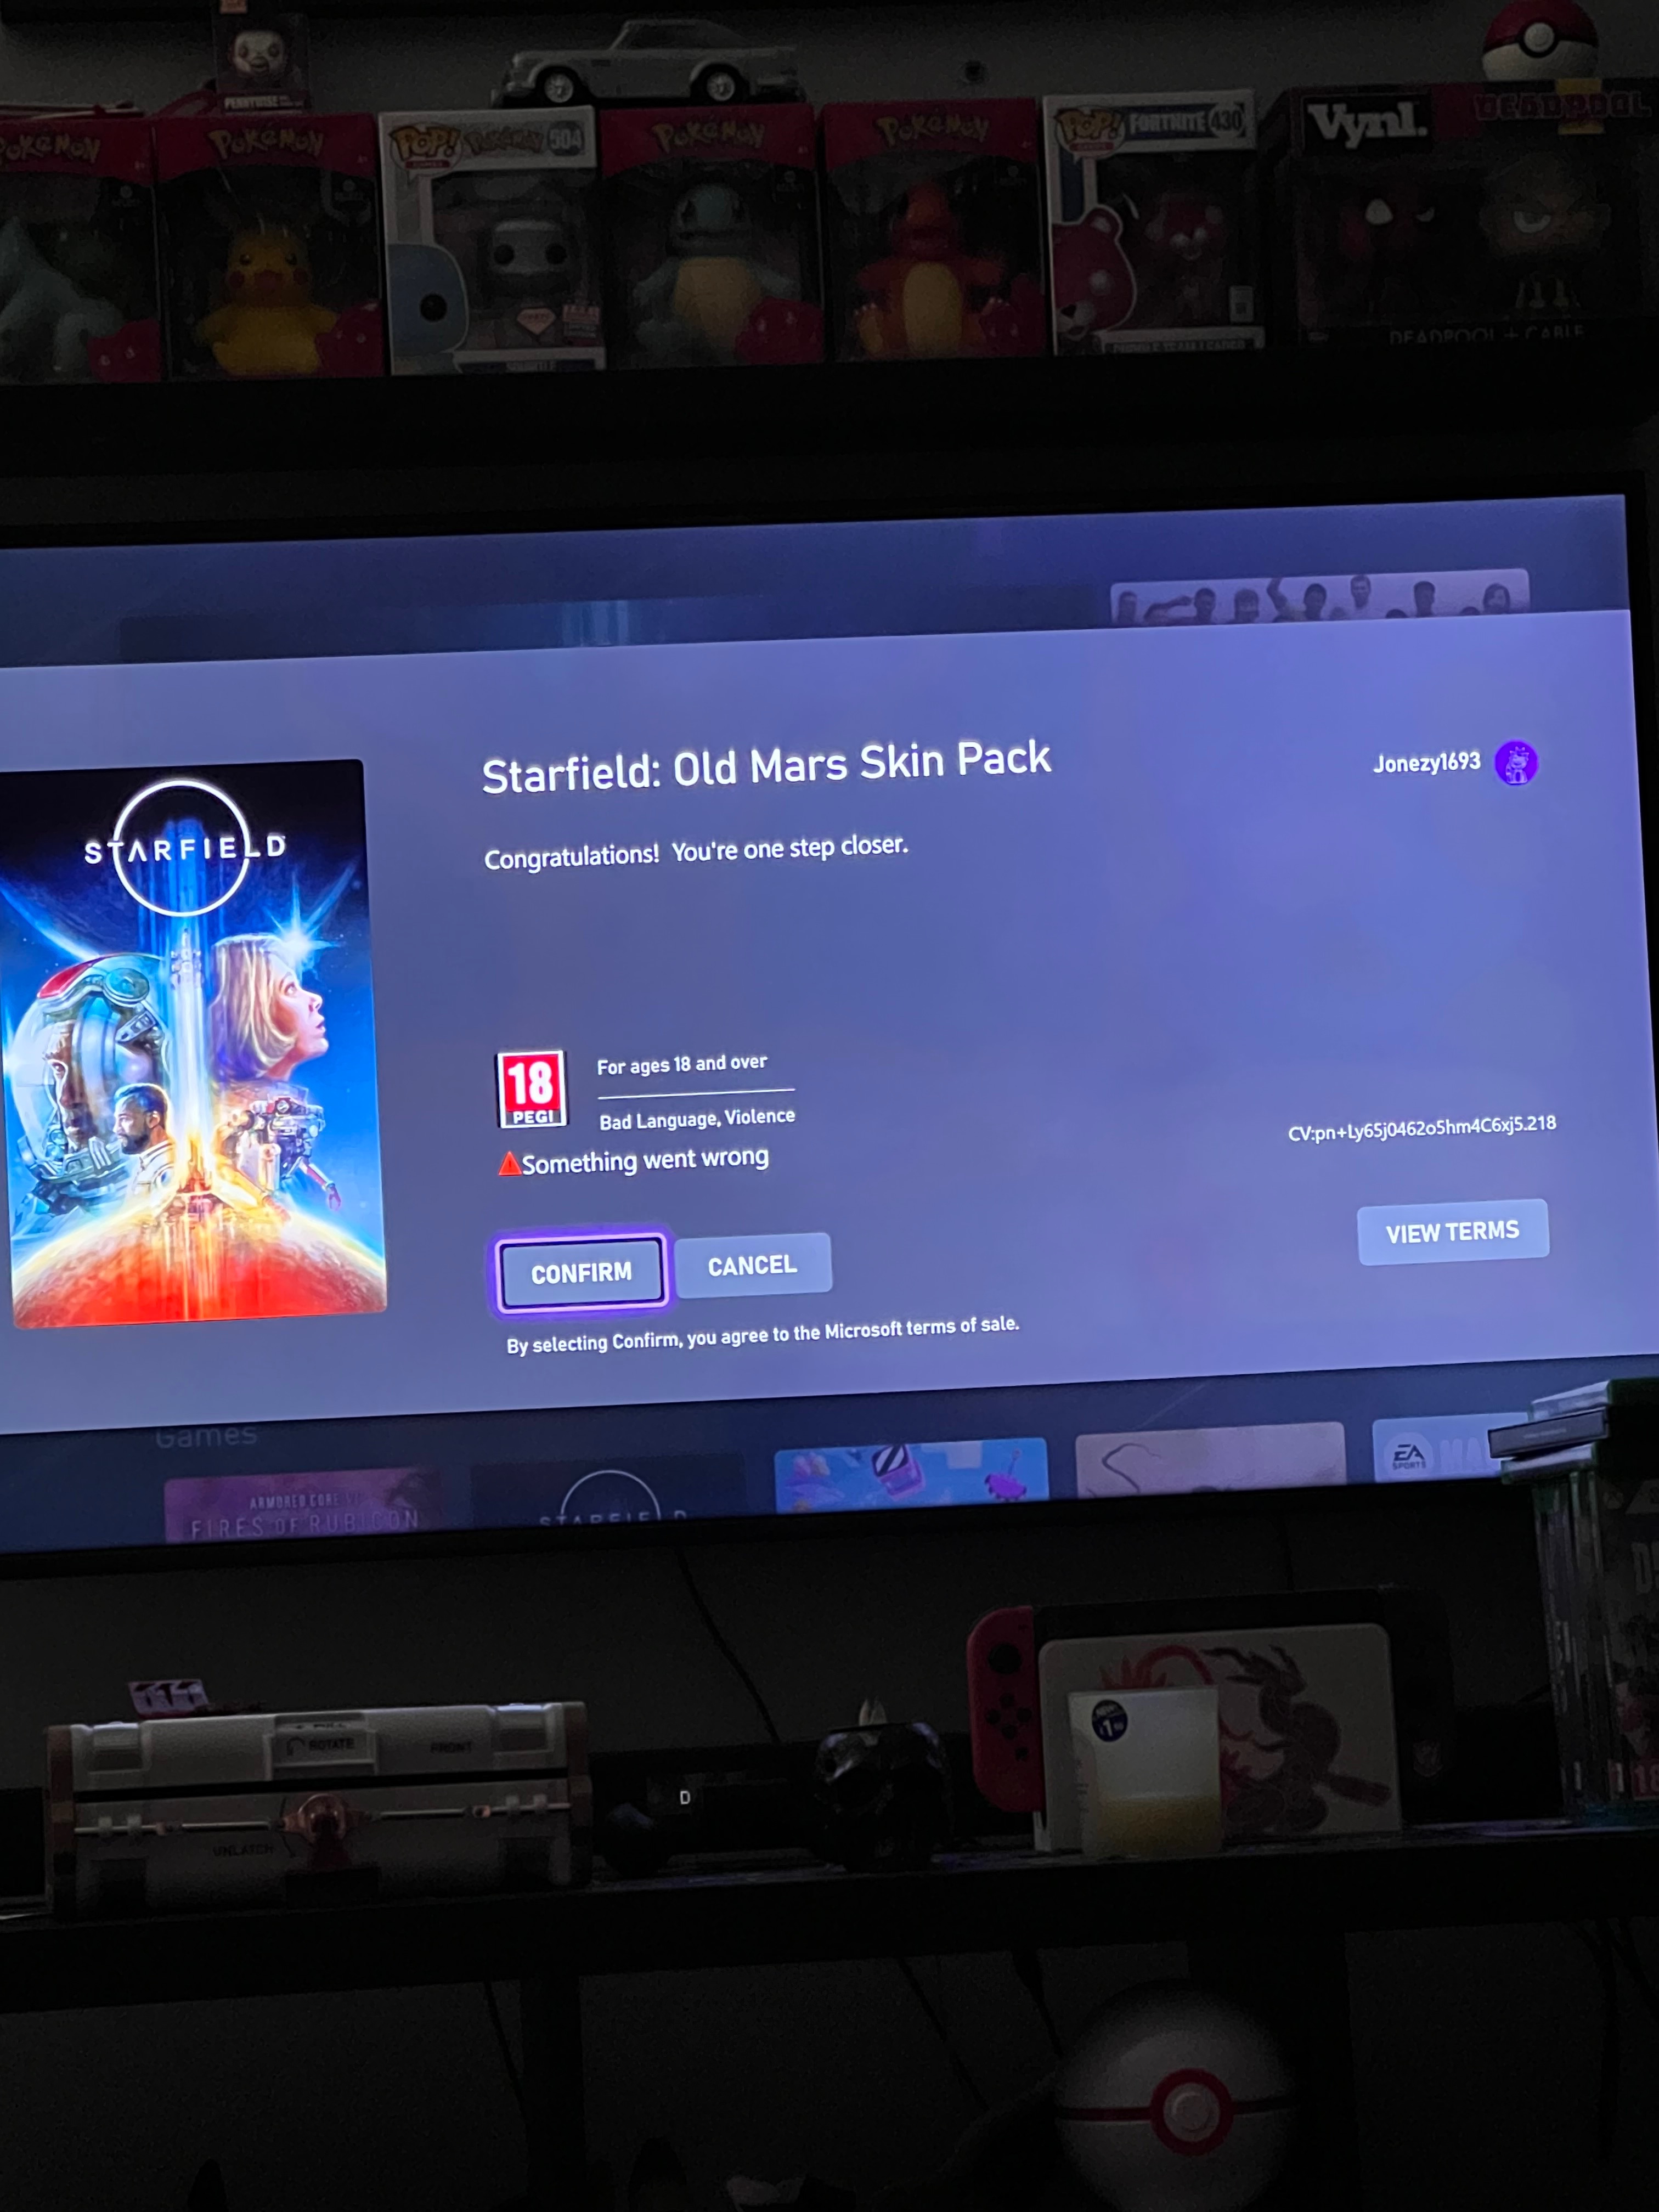 Starfield Isn't Coming To PS5, Microsoft Confirms